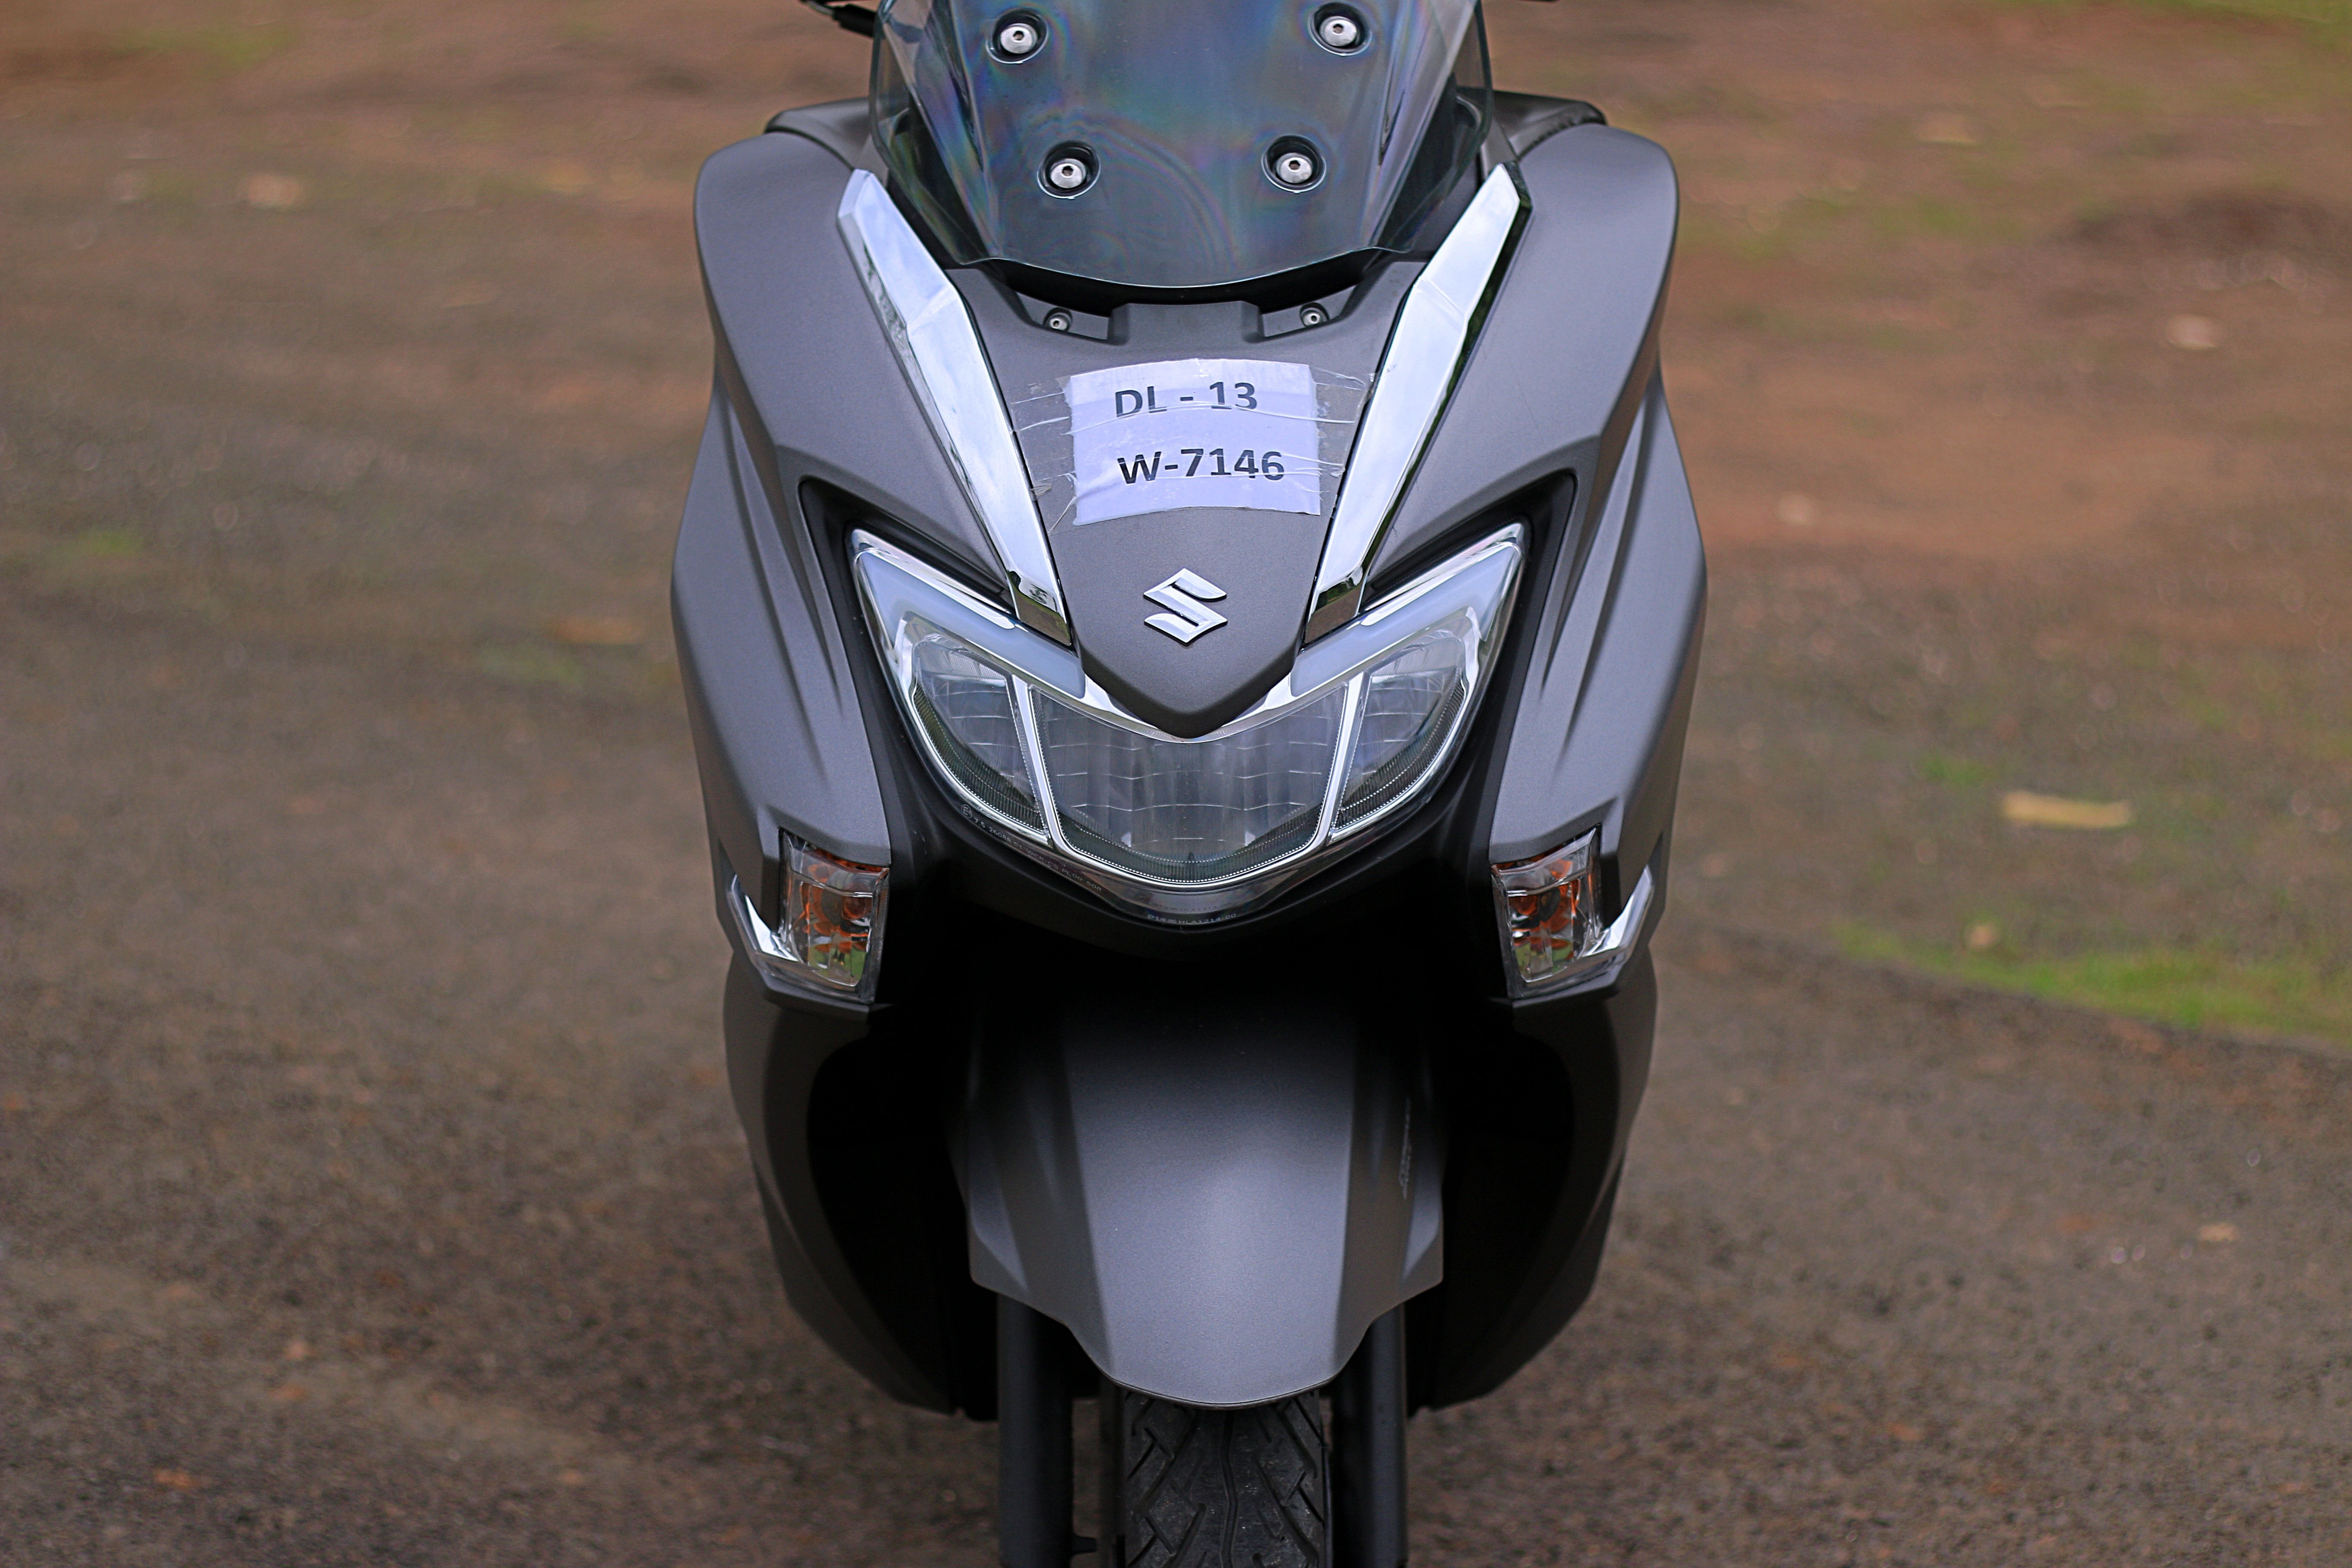 Top 5 Scooters With LED Headlamps: Honda Dio, Grazia, Jupiter And More